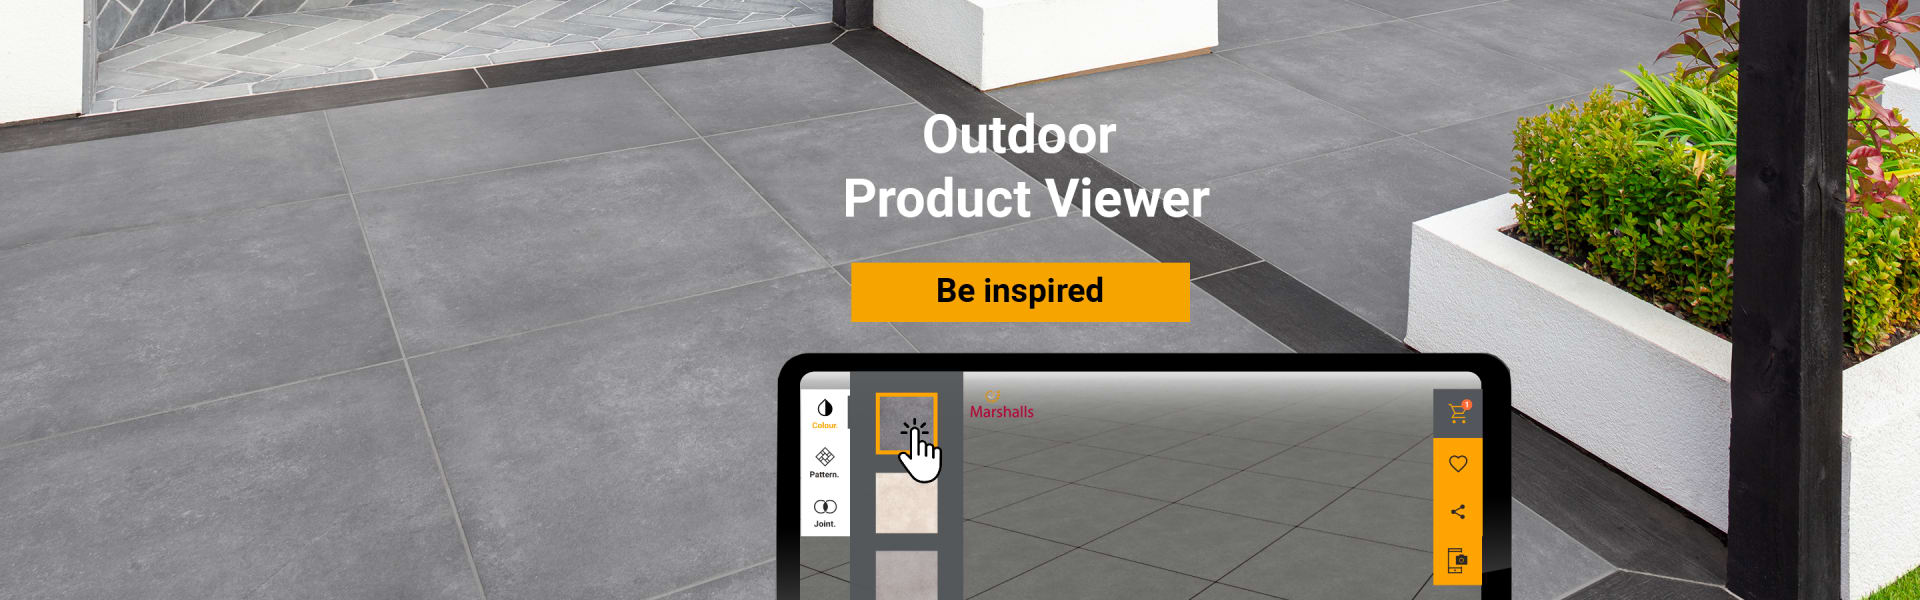 Outdoor Product Viewer banner